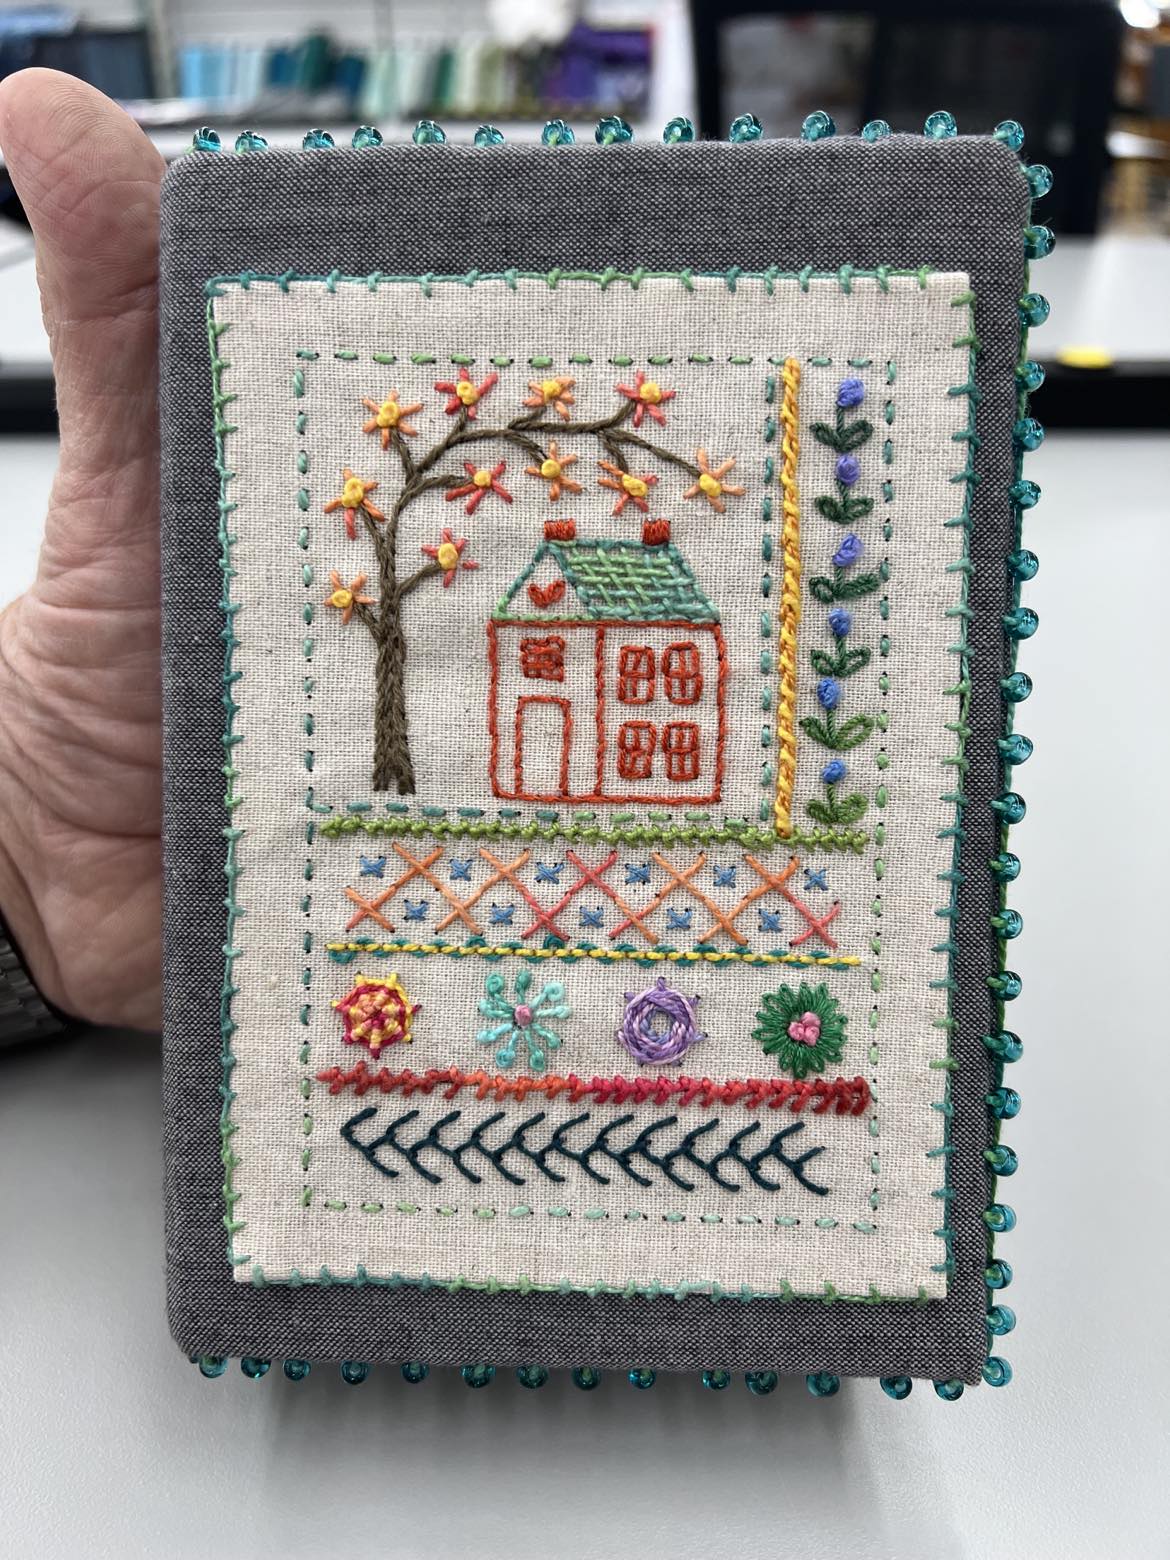 Embroider a half stitch kit - Hand embroidery tutorial 